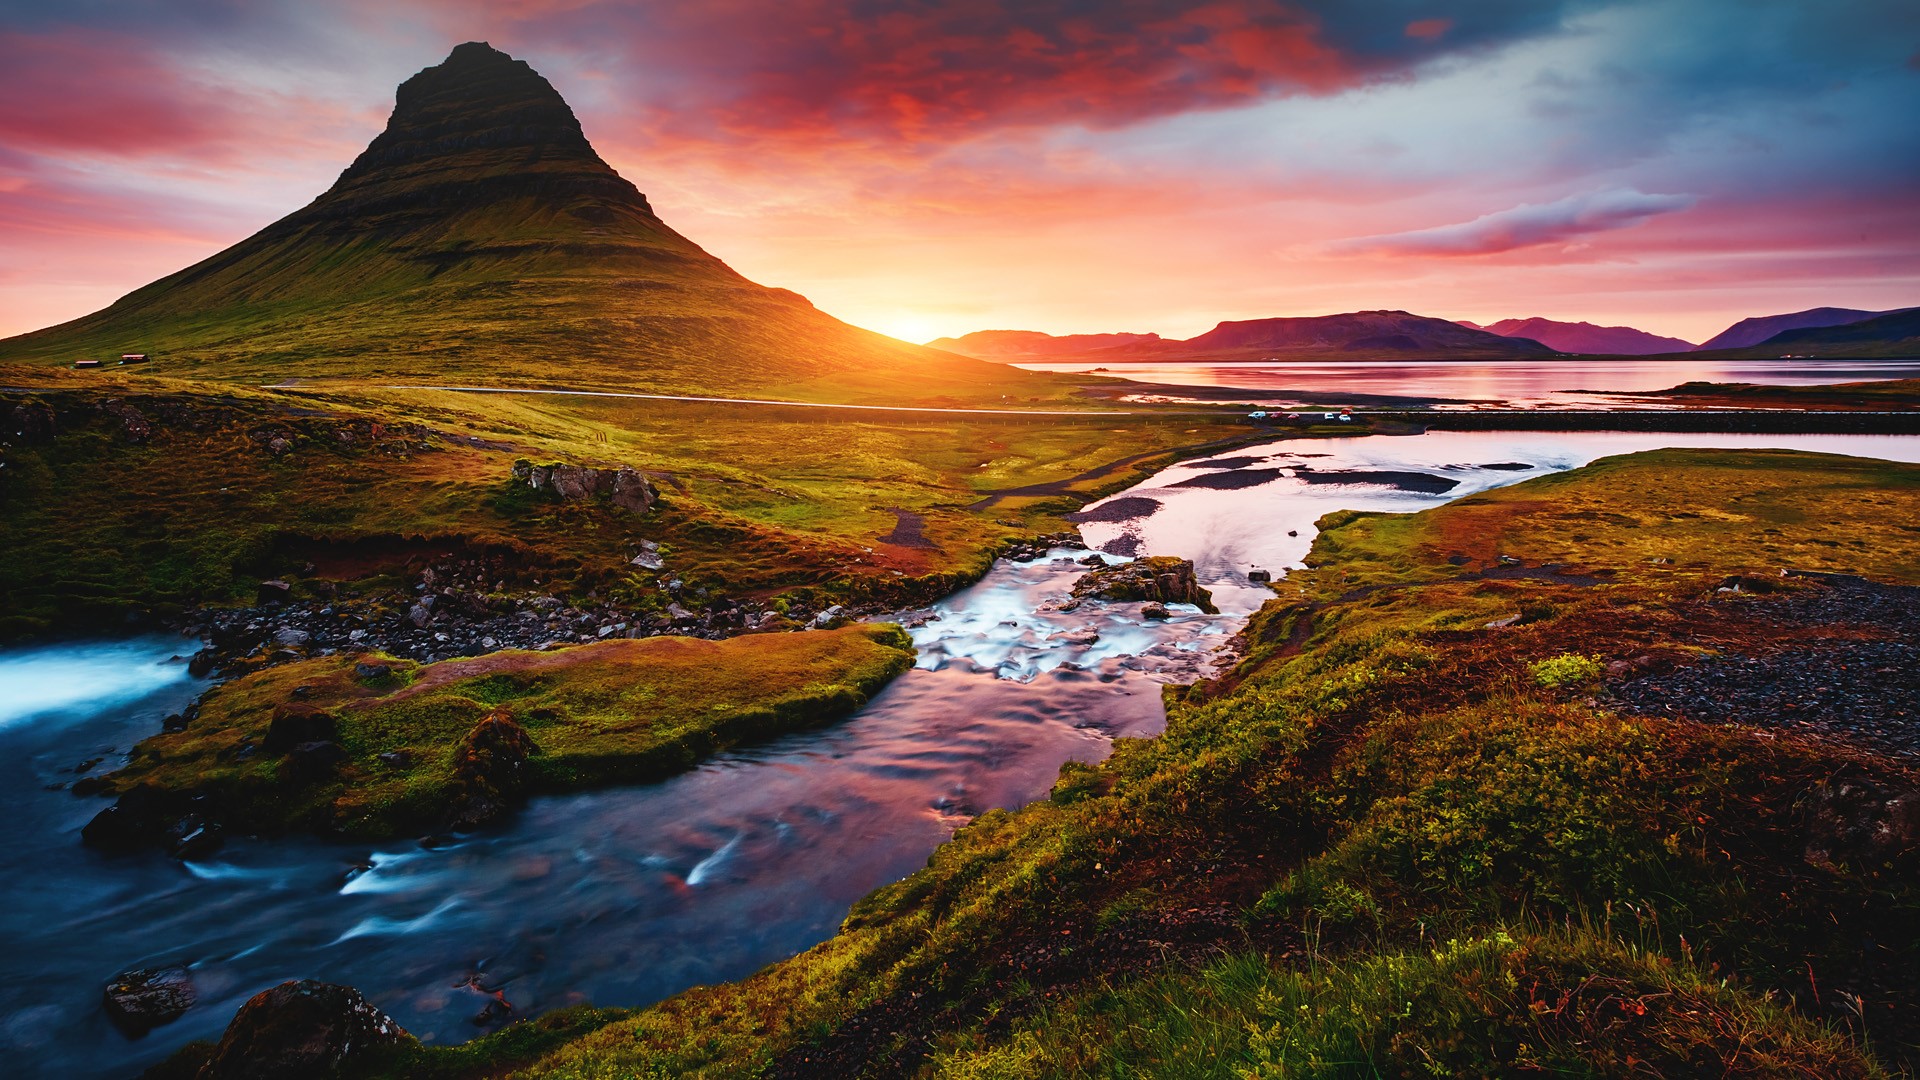 General 1920x1080 nature landscape far view water rocks clouds sky sunset grass moss mountains Kirkjufell peninsula Iceland nordic landscapes